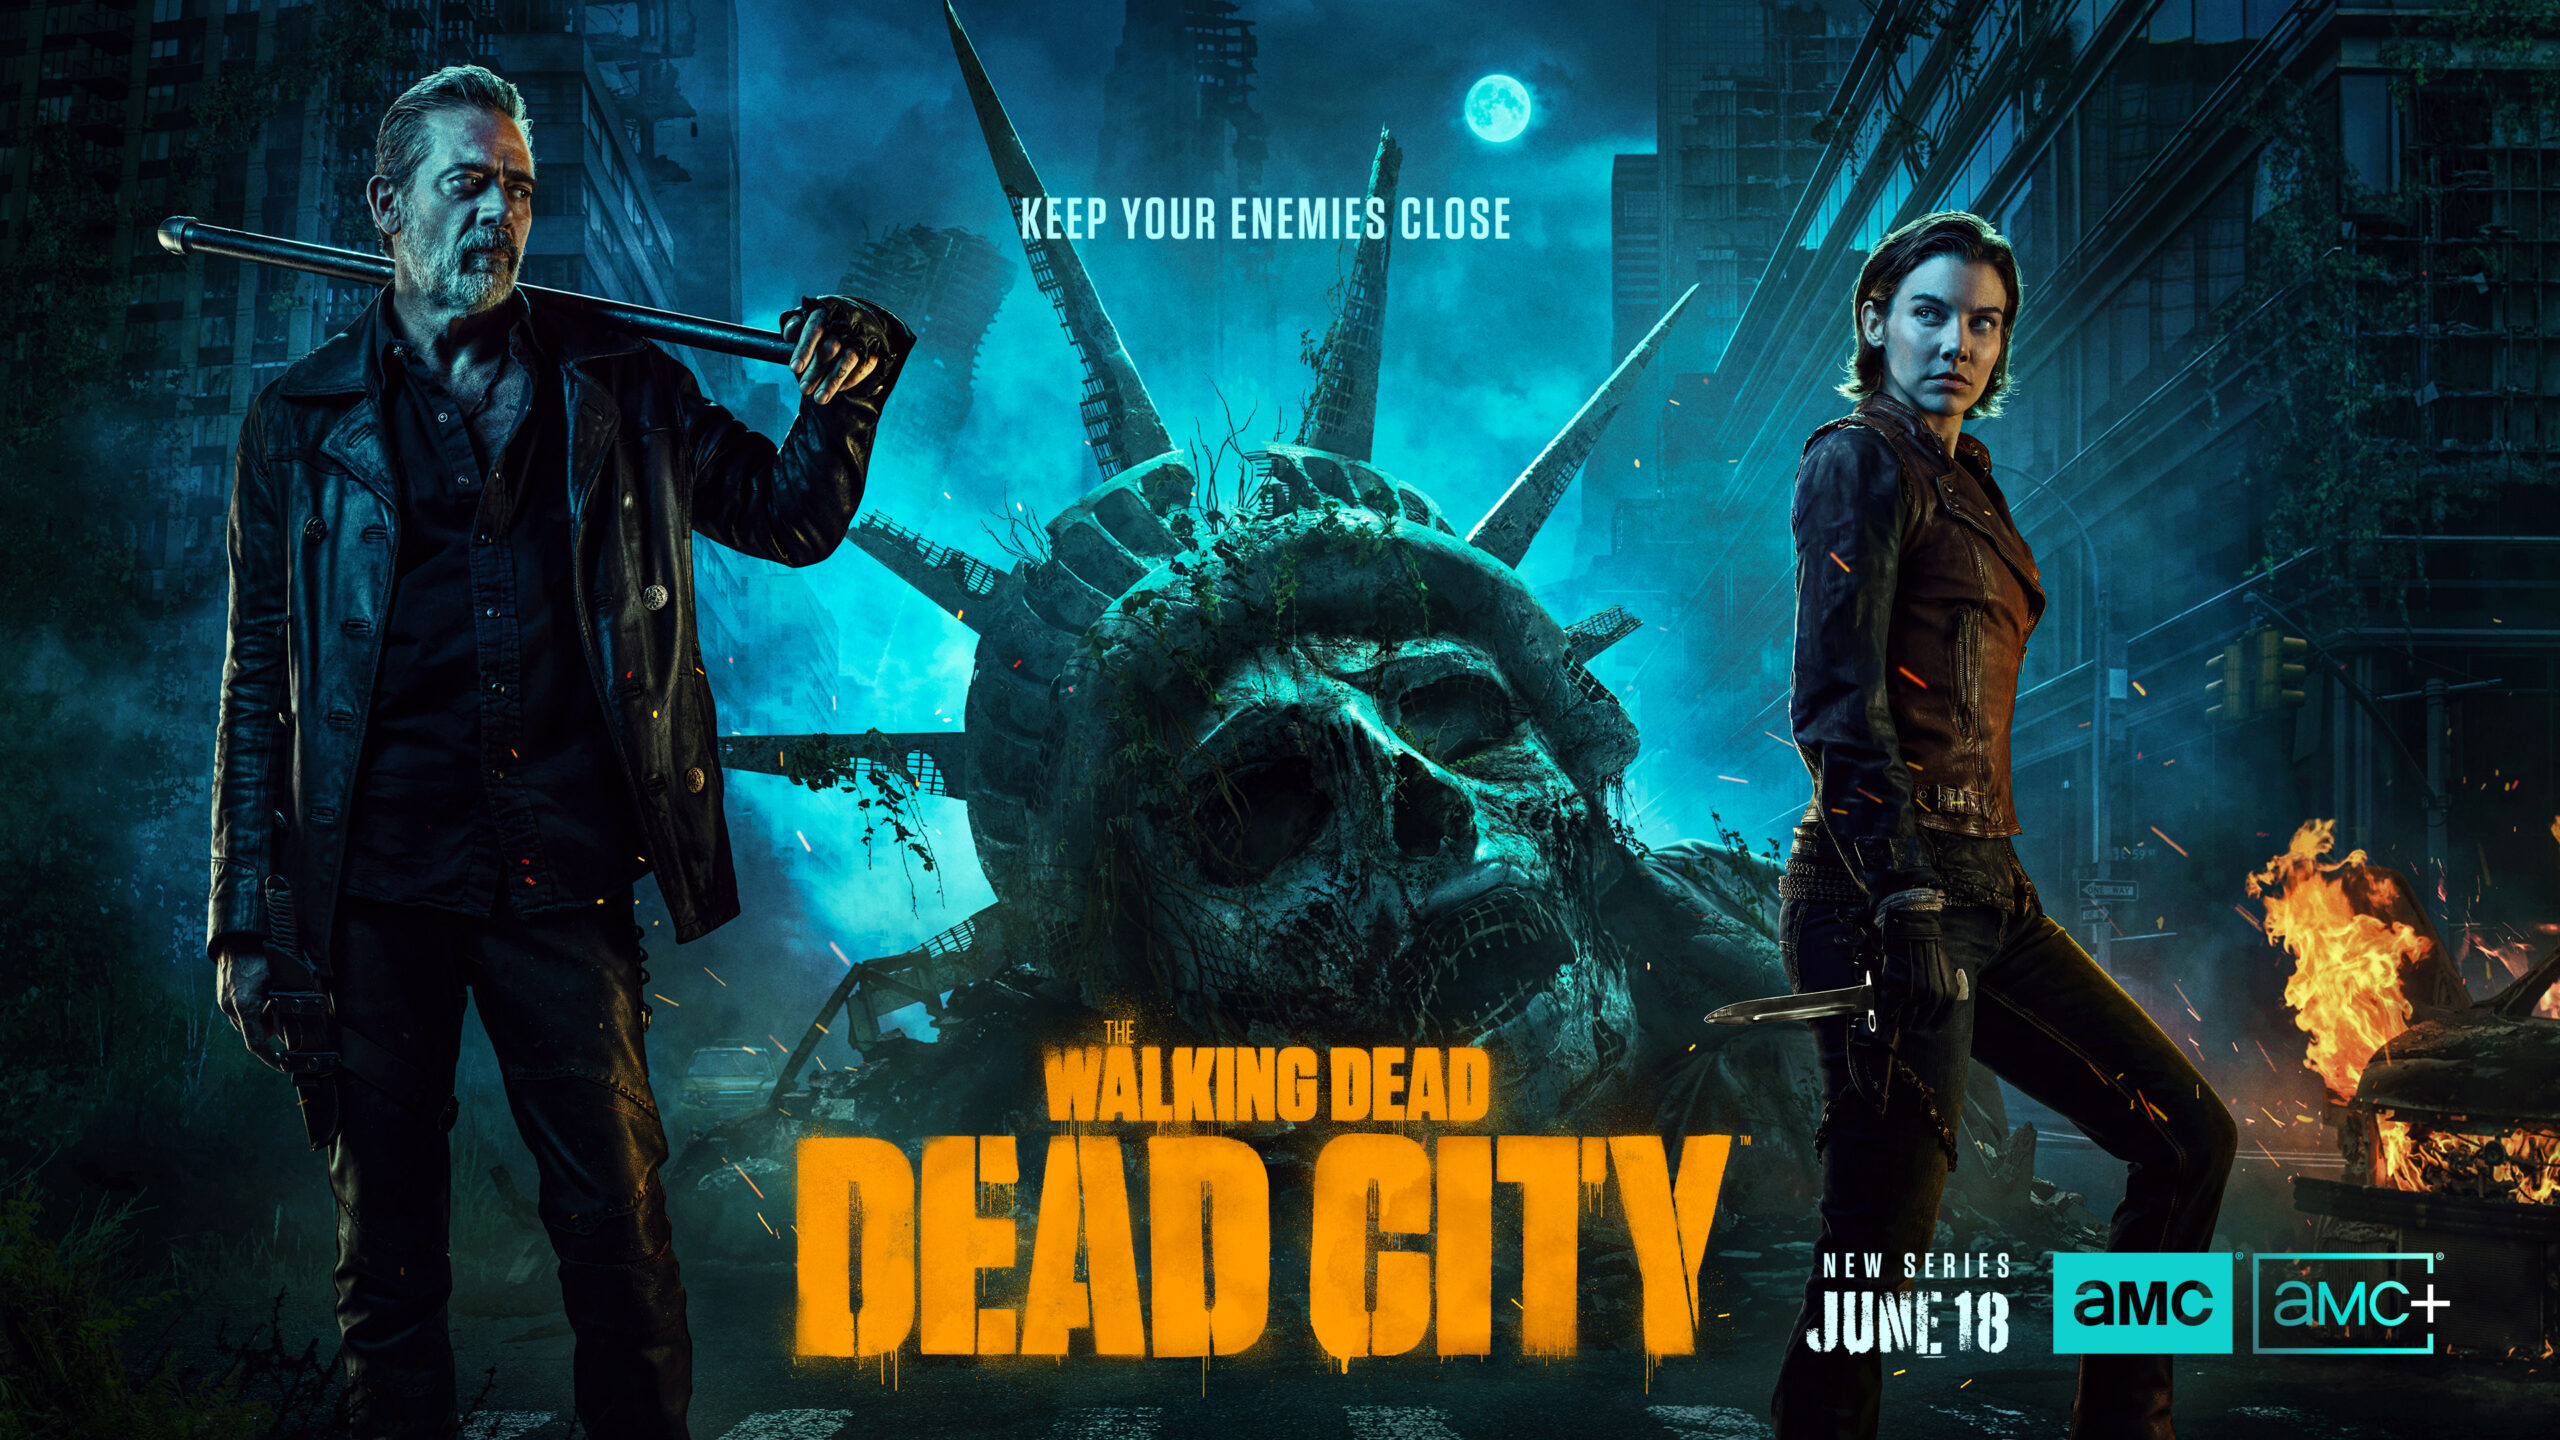 Provided by AMC The Walking Dead: Dead City Promo. Art/Photo provided by AMC Networks